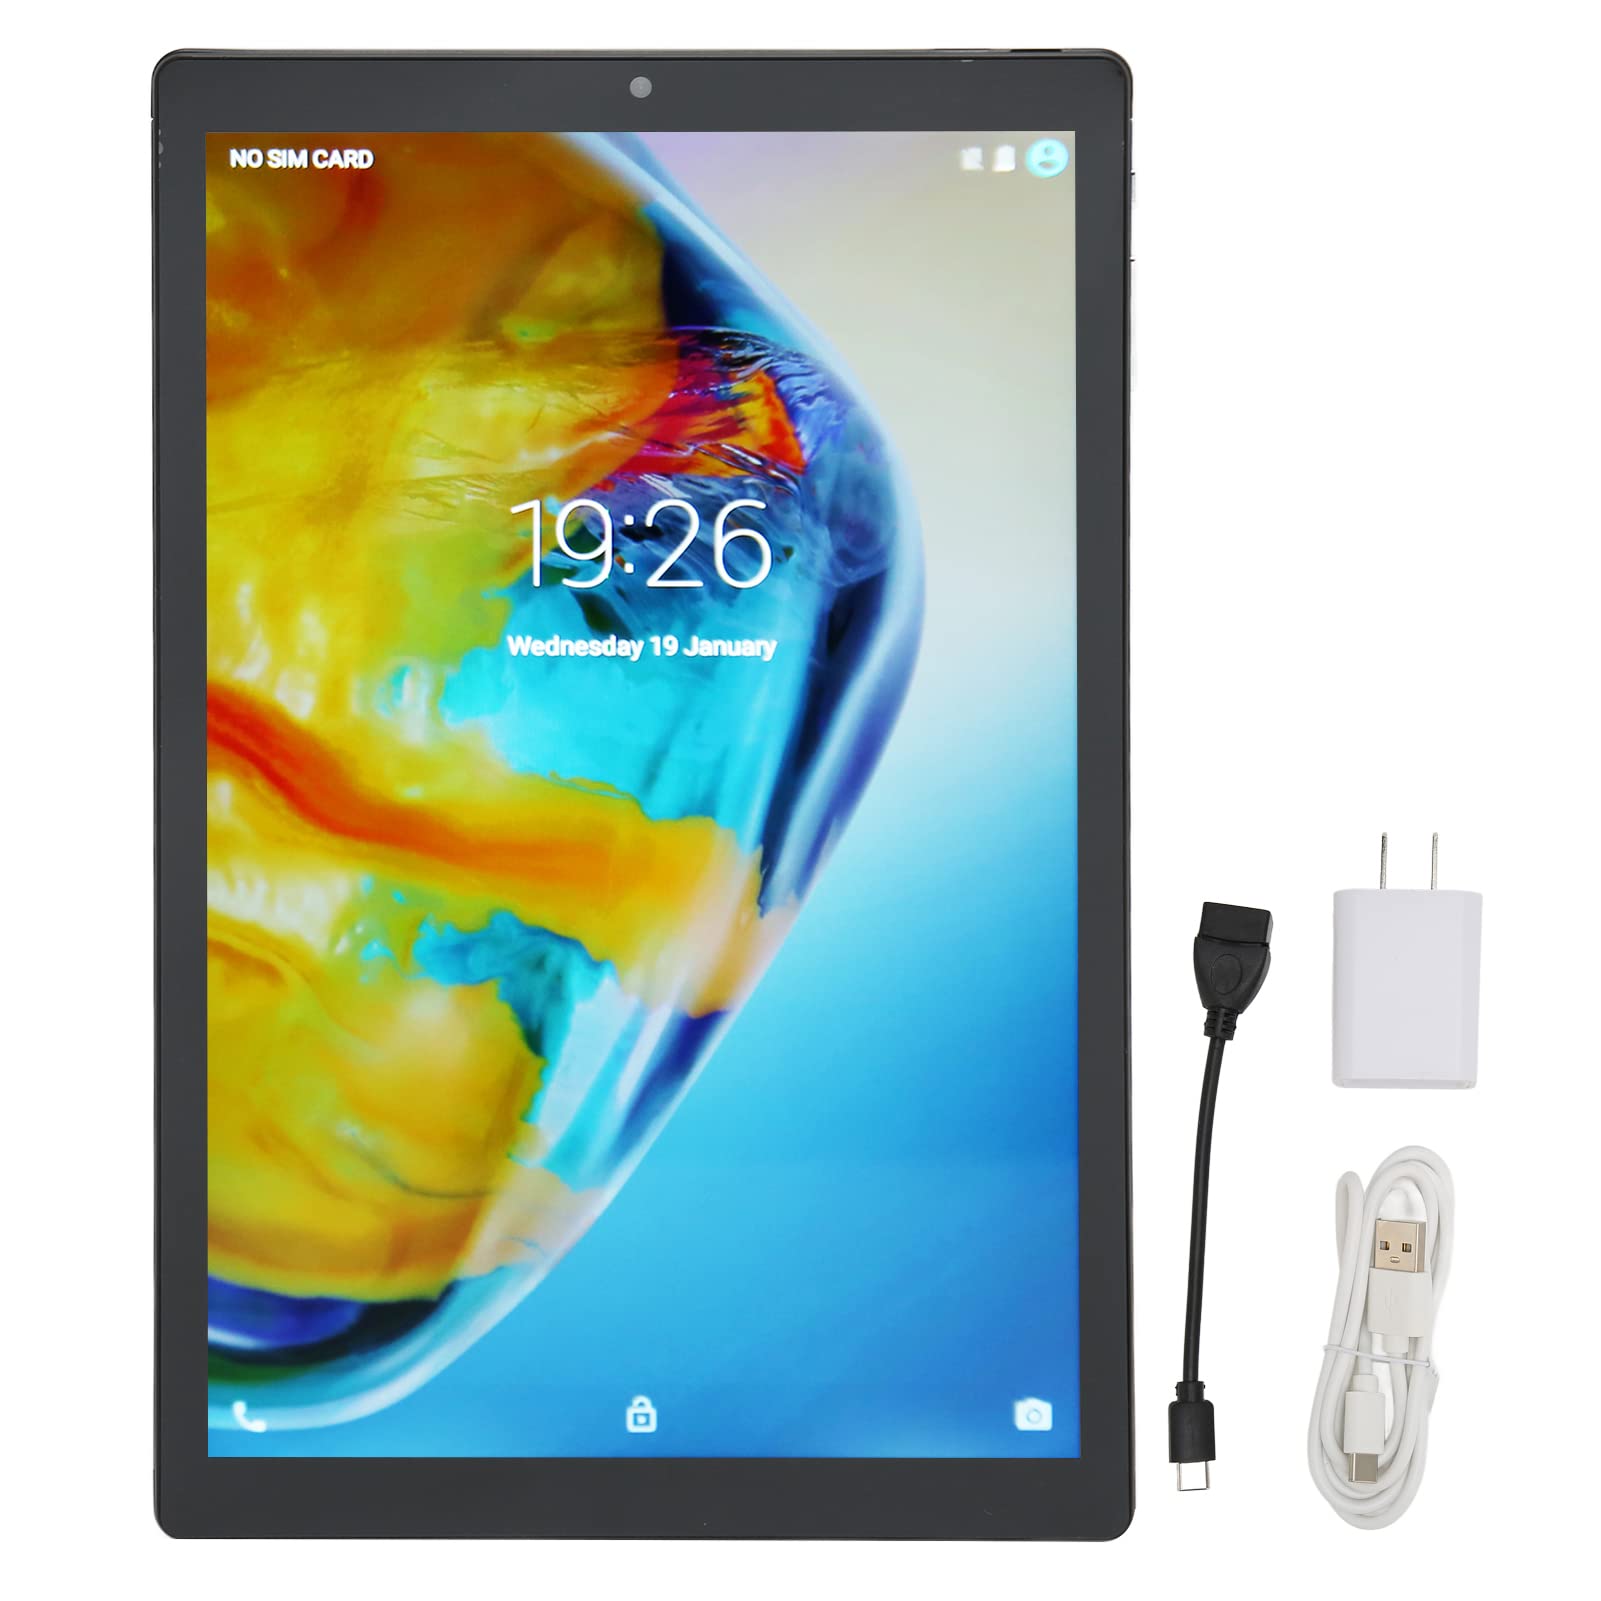 Zopsc 10 Inch Tablet, HD IPS Tablet with Octa Core CPU, 4GB+64GB, 128GB Expandable, 5MP+8MP Dual Camera, 5000mAh Battery, Supports 3G Network and 5G WiFi, Blue (US Plug)